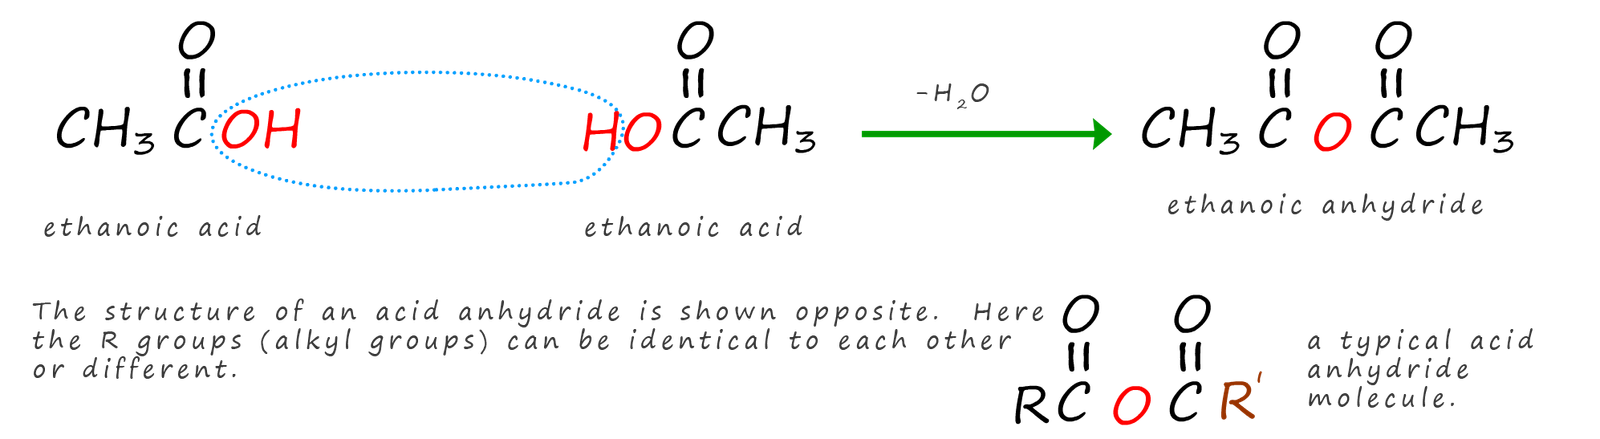 structure of a typical acid anhydride molecule